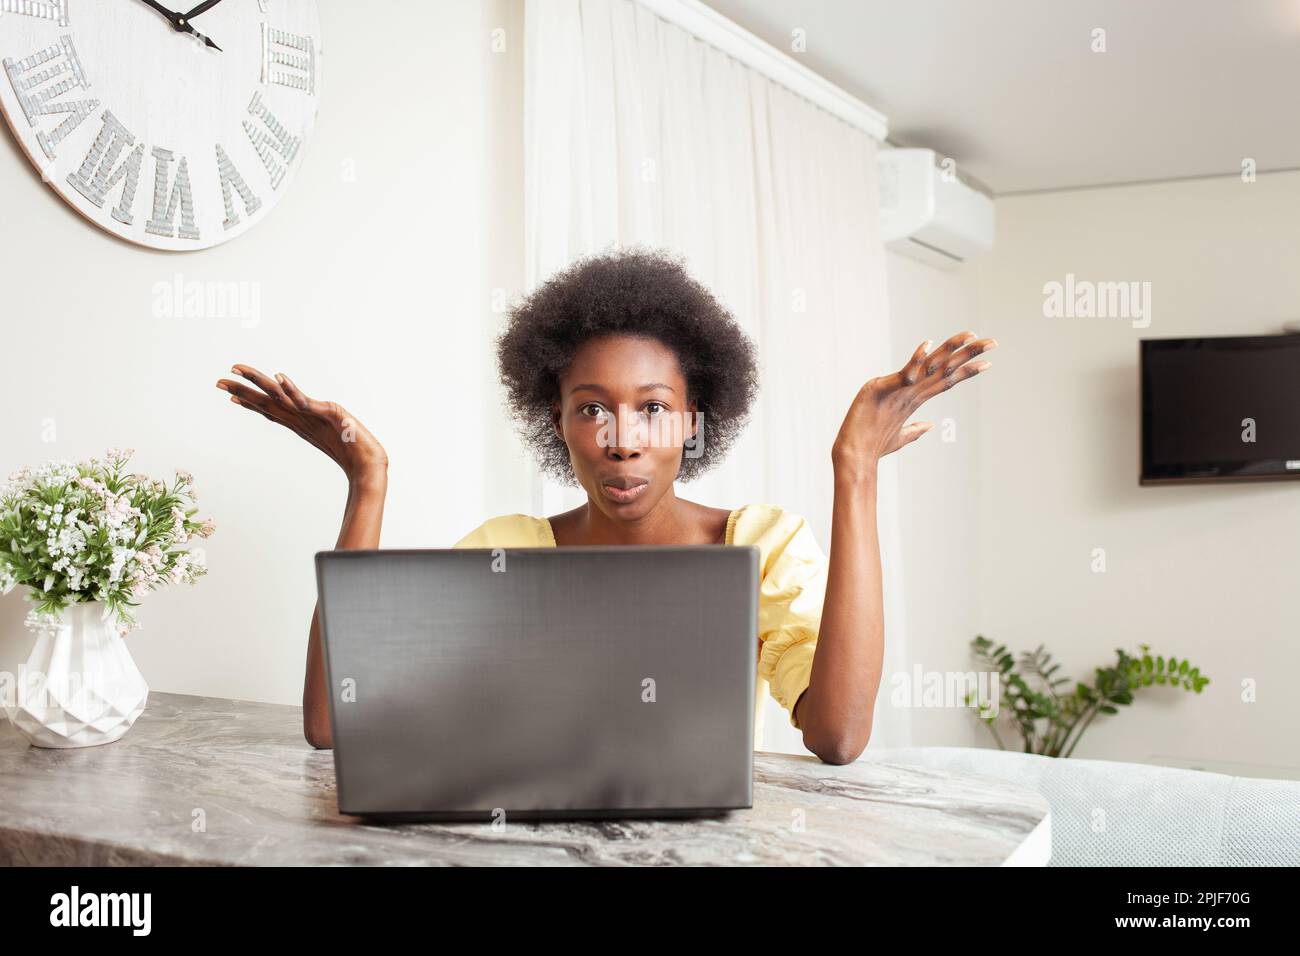 a African American Black Woman Portrait House. Indoor, woman is surprised, stunned, angry, mouth open. Winning, bug, laptop broken, lottery, job vacan Stock Photo